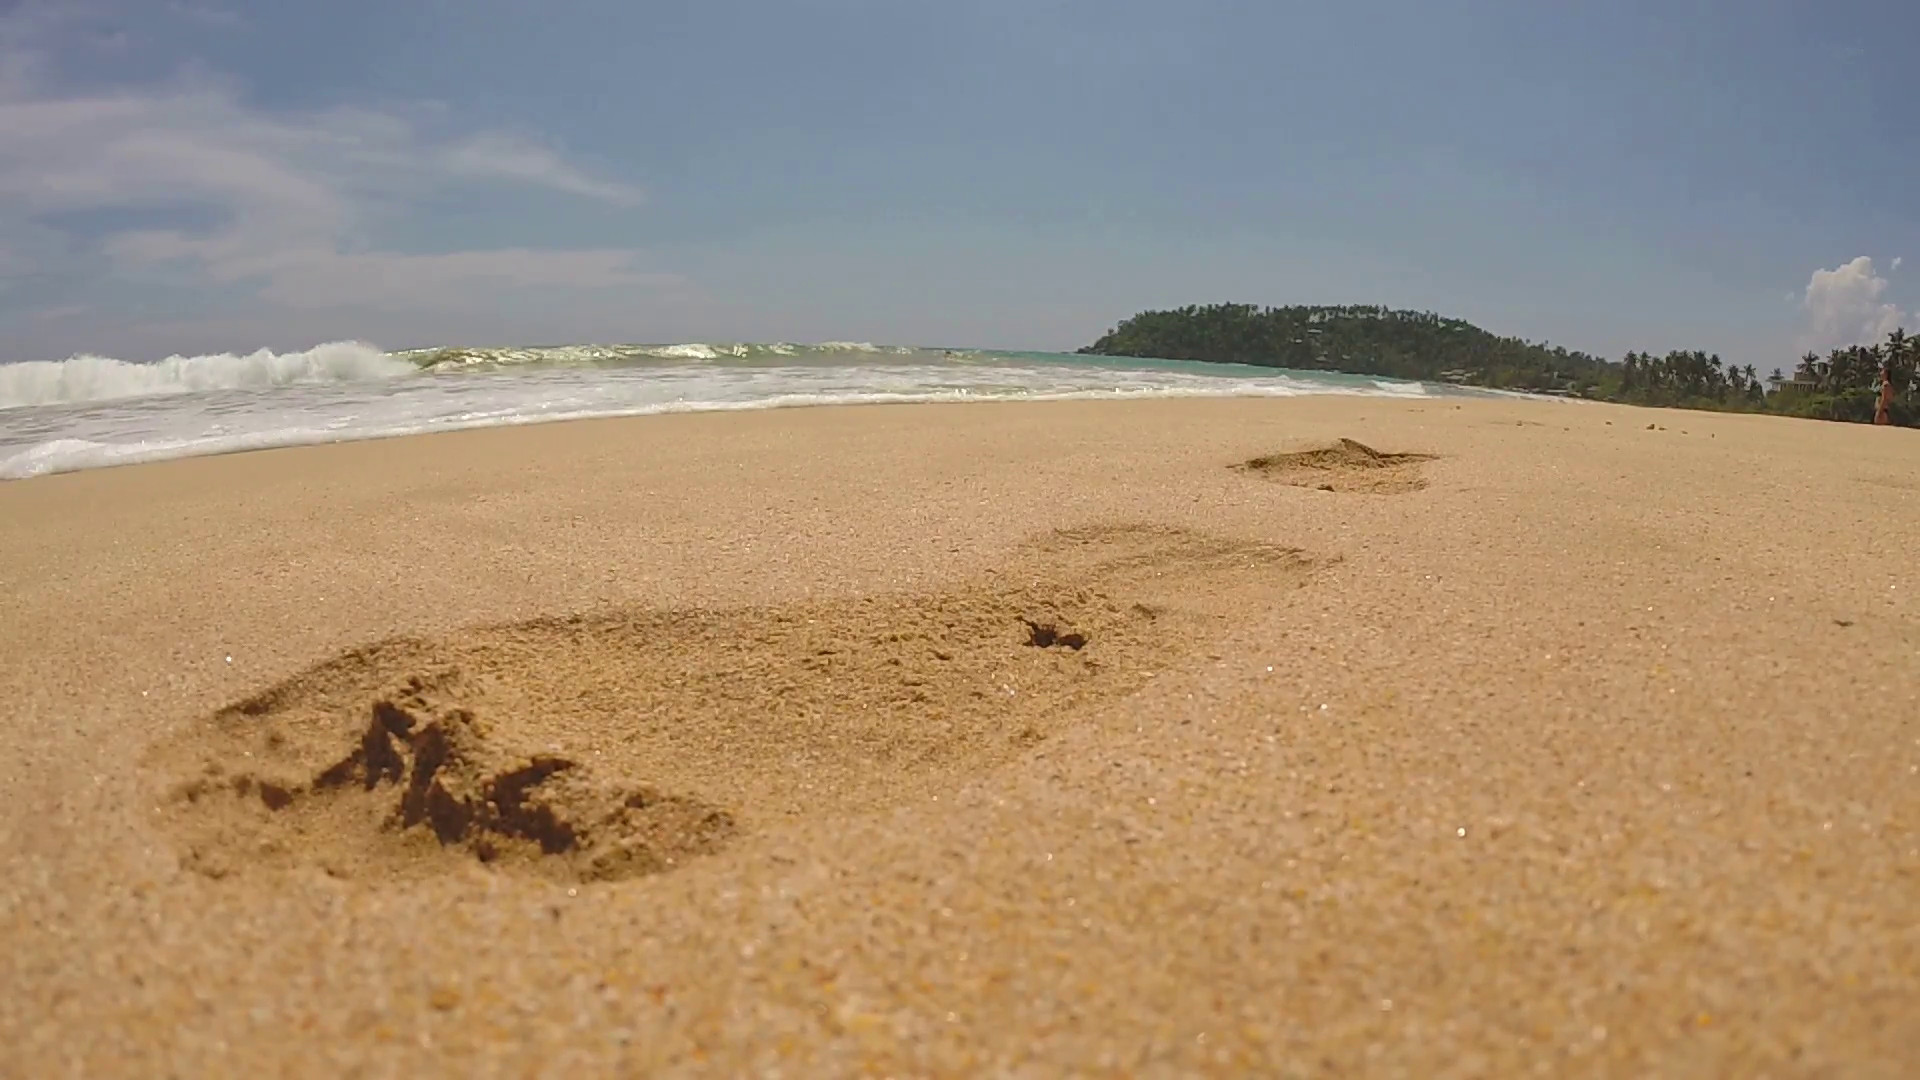 1920x1080 waves washing up onto foot prints in the sand on beach in the tropics stock  video footage videoblocks with fuspuren im sand wallpaper.